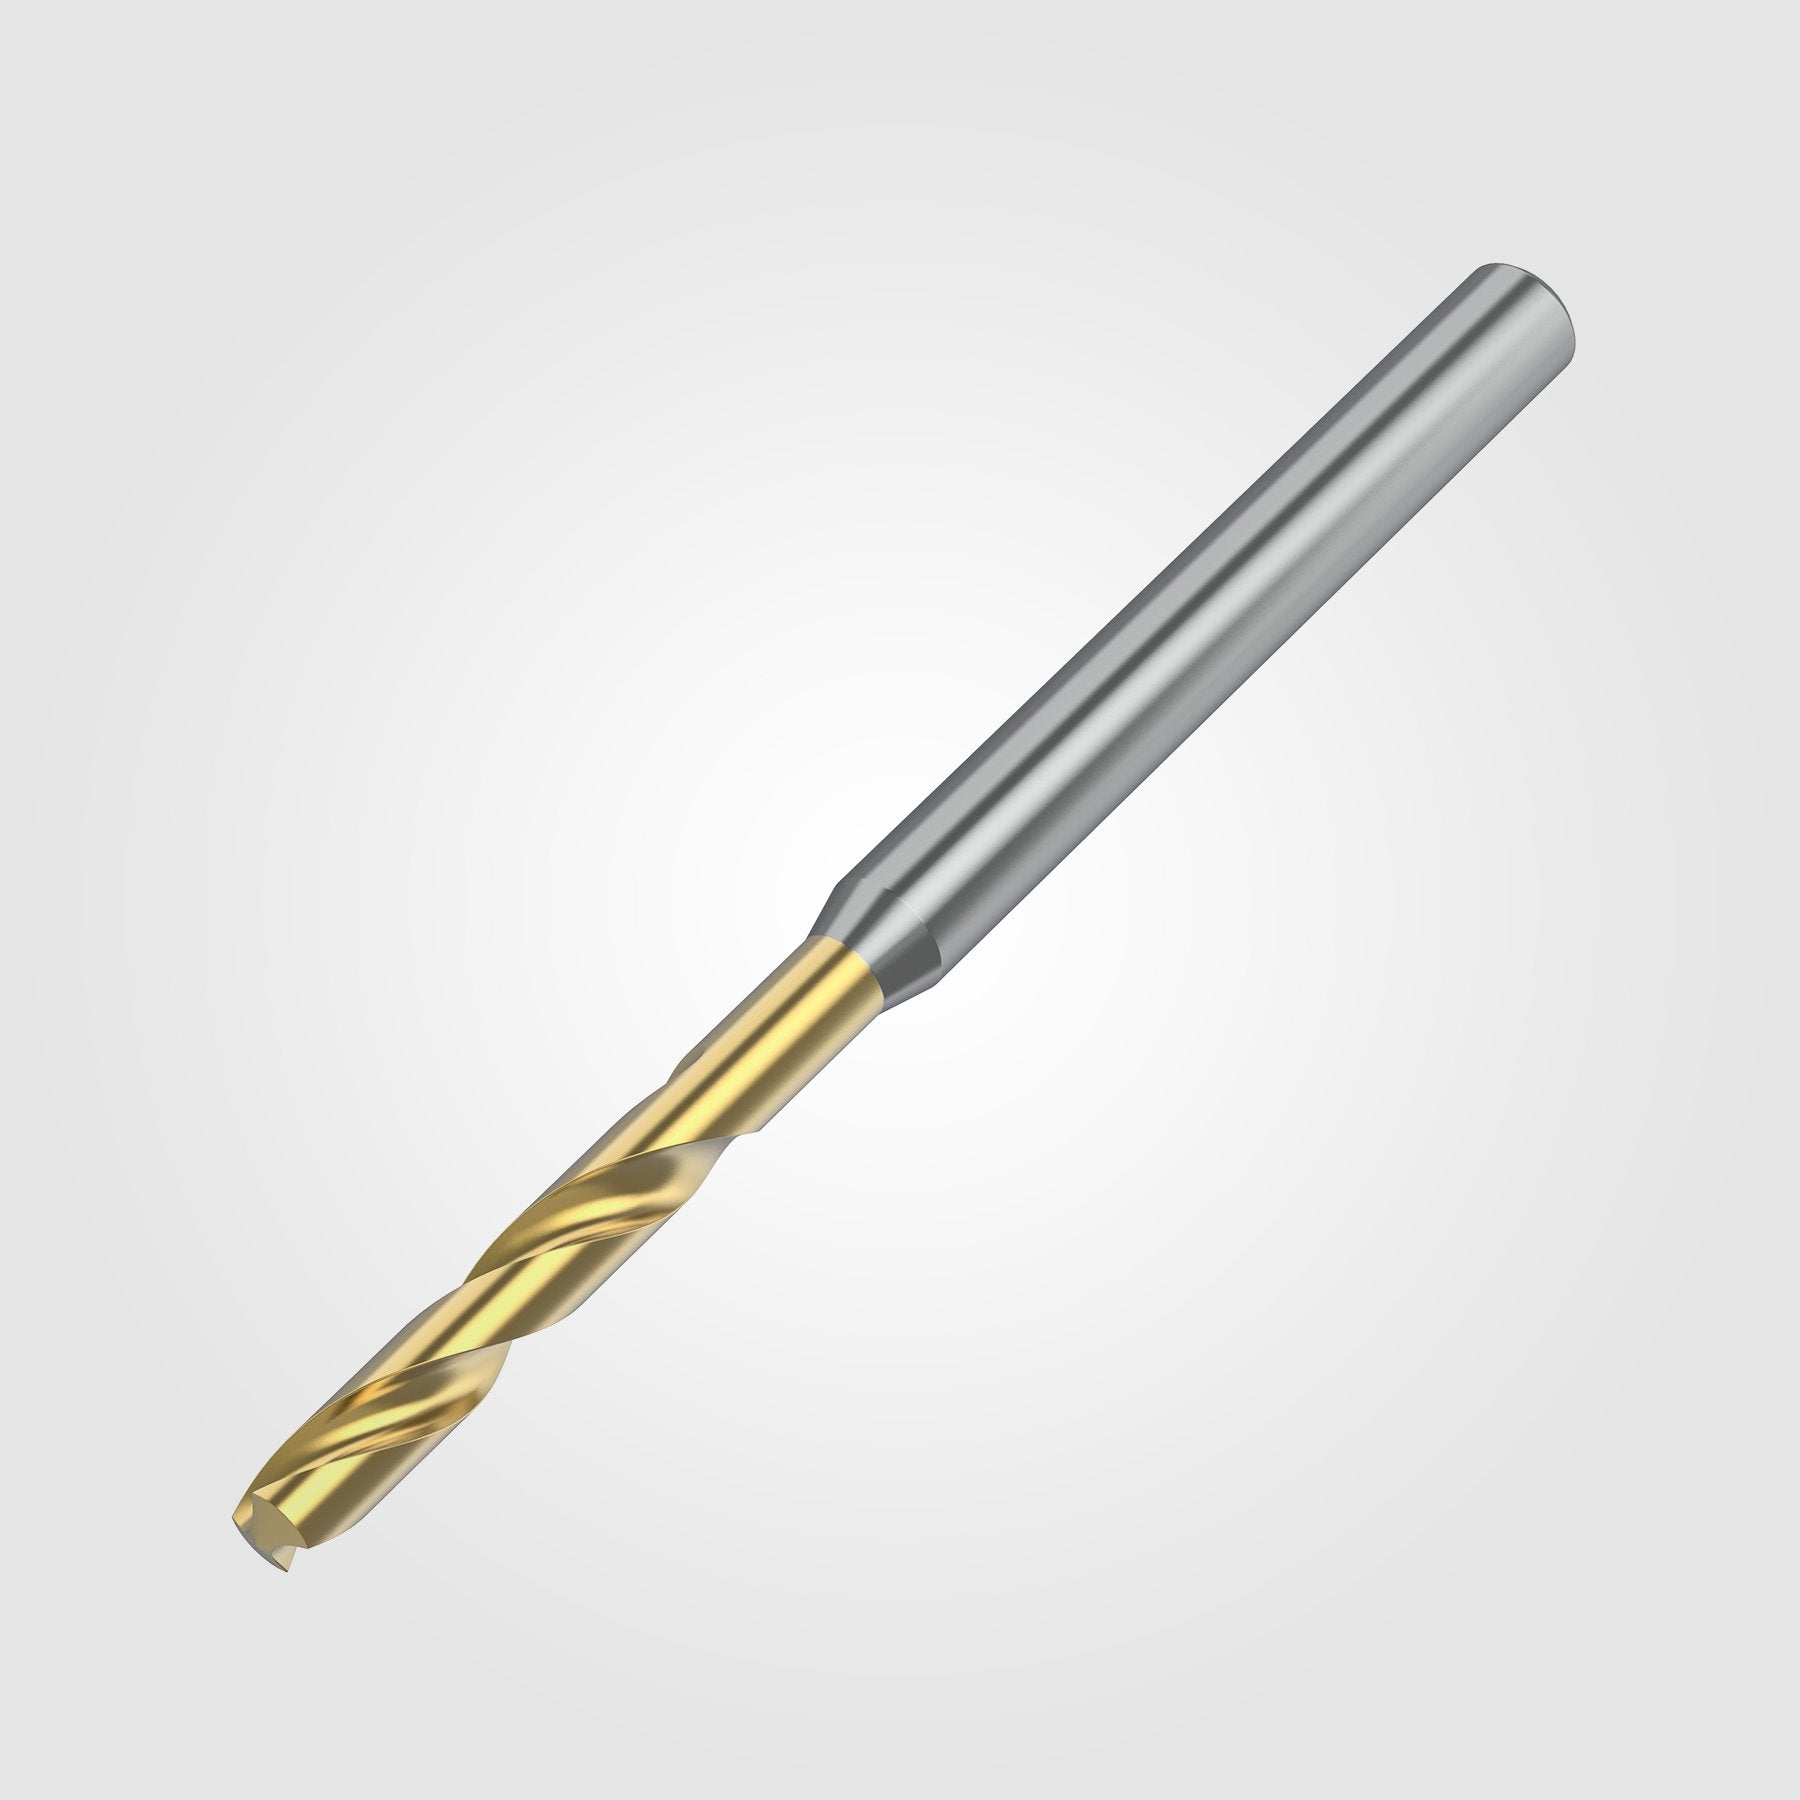 GOdrill (THROUGH COOLANT) | 2.1mm / .0827" / 3xD | SOLID CARBIDE DRILL | 4148810